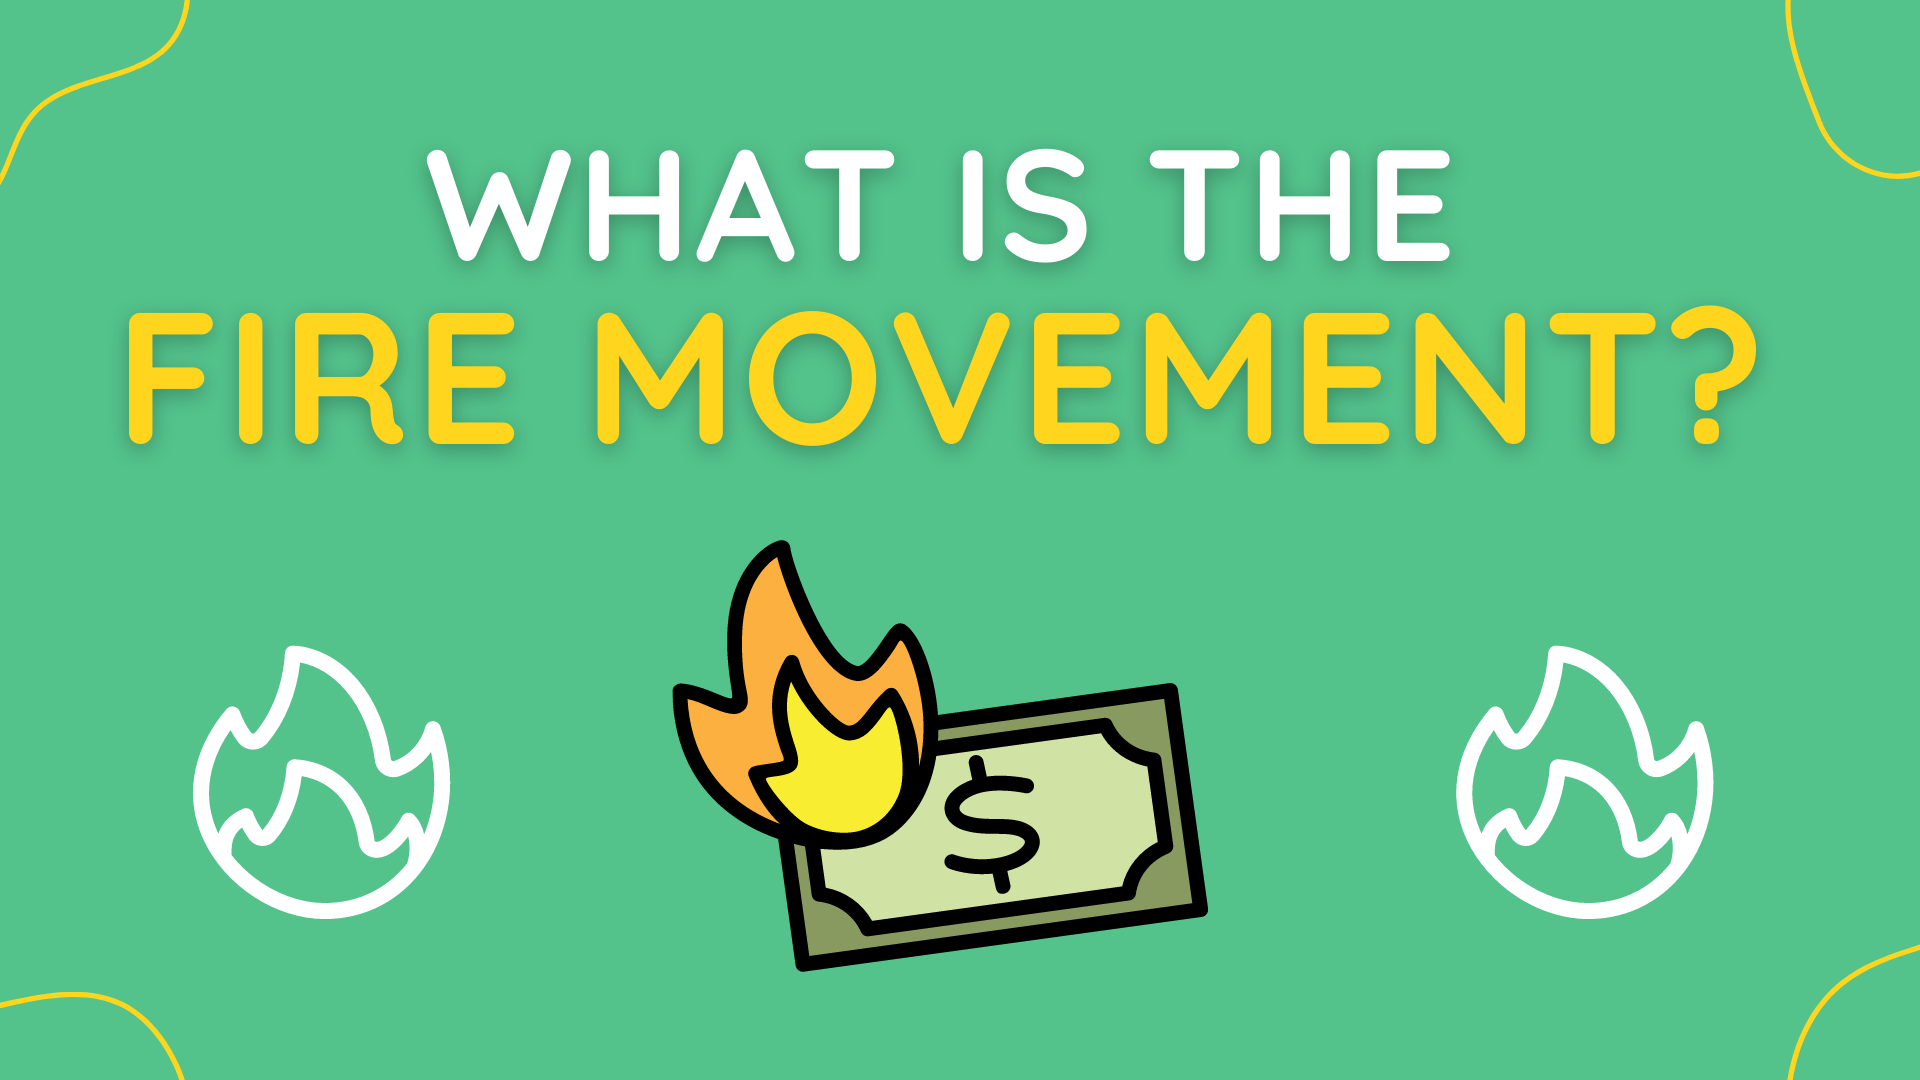 The FIRE movement explained